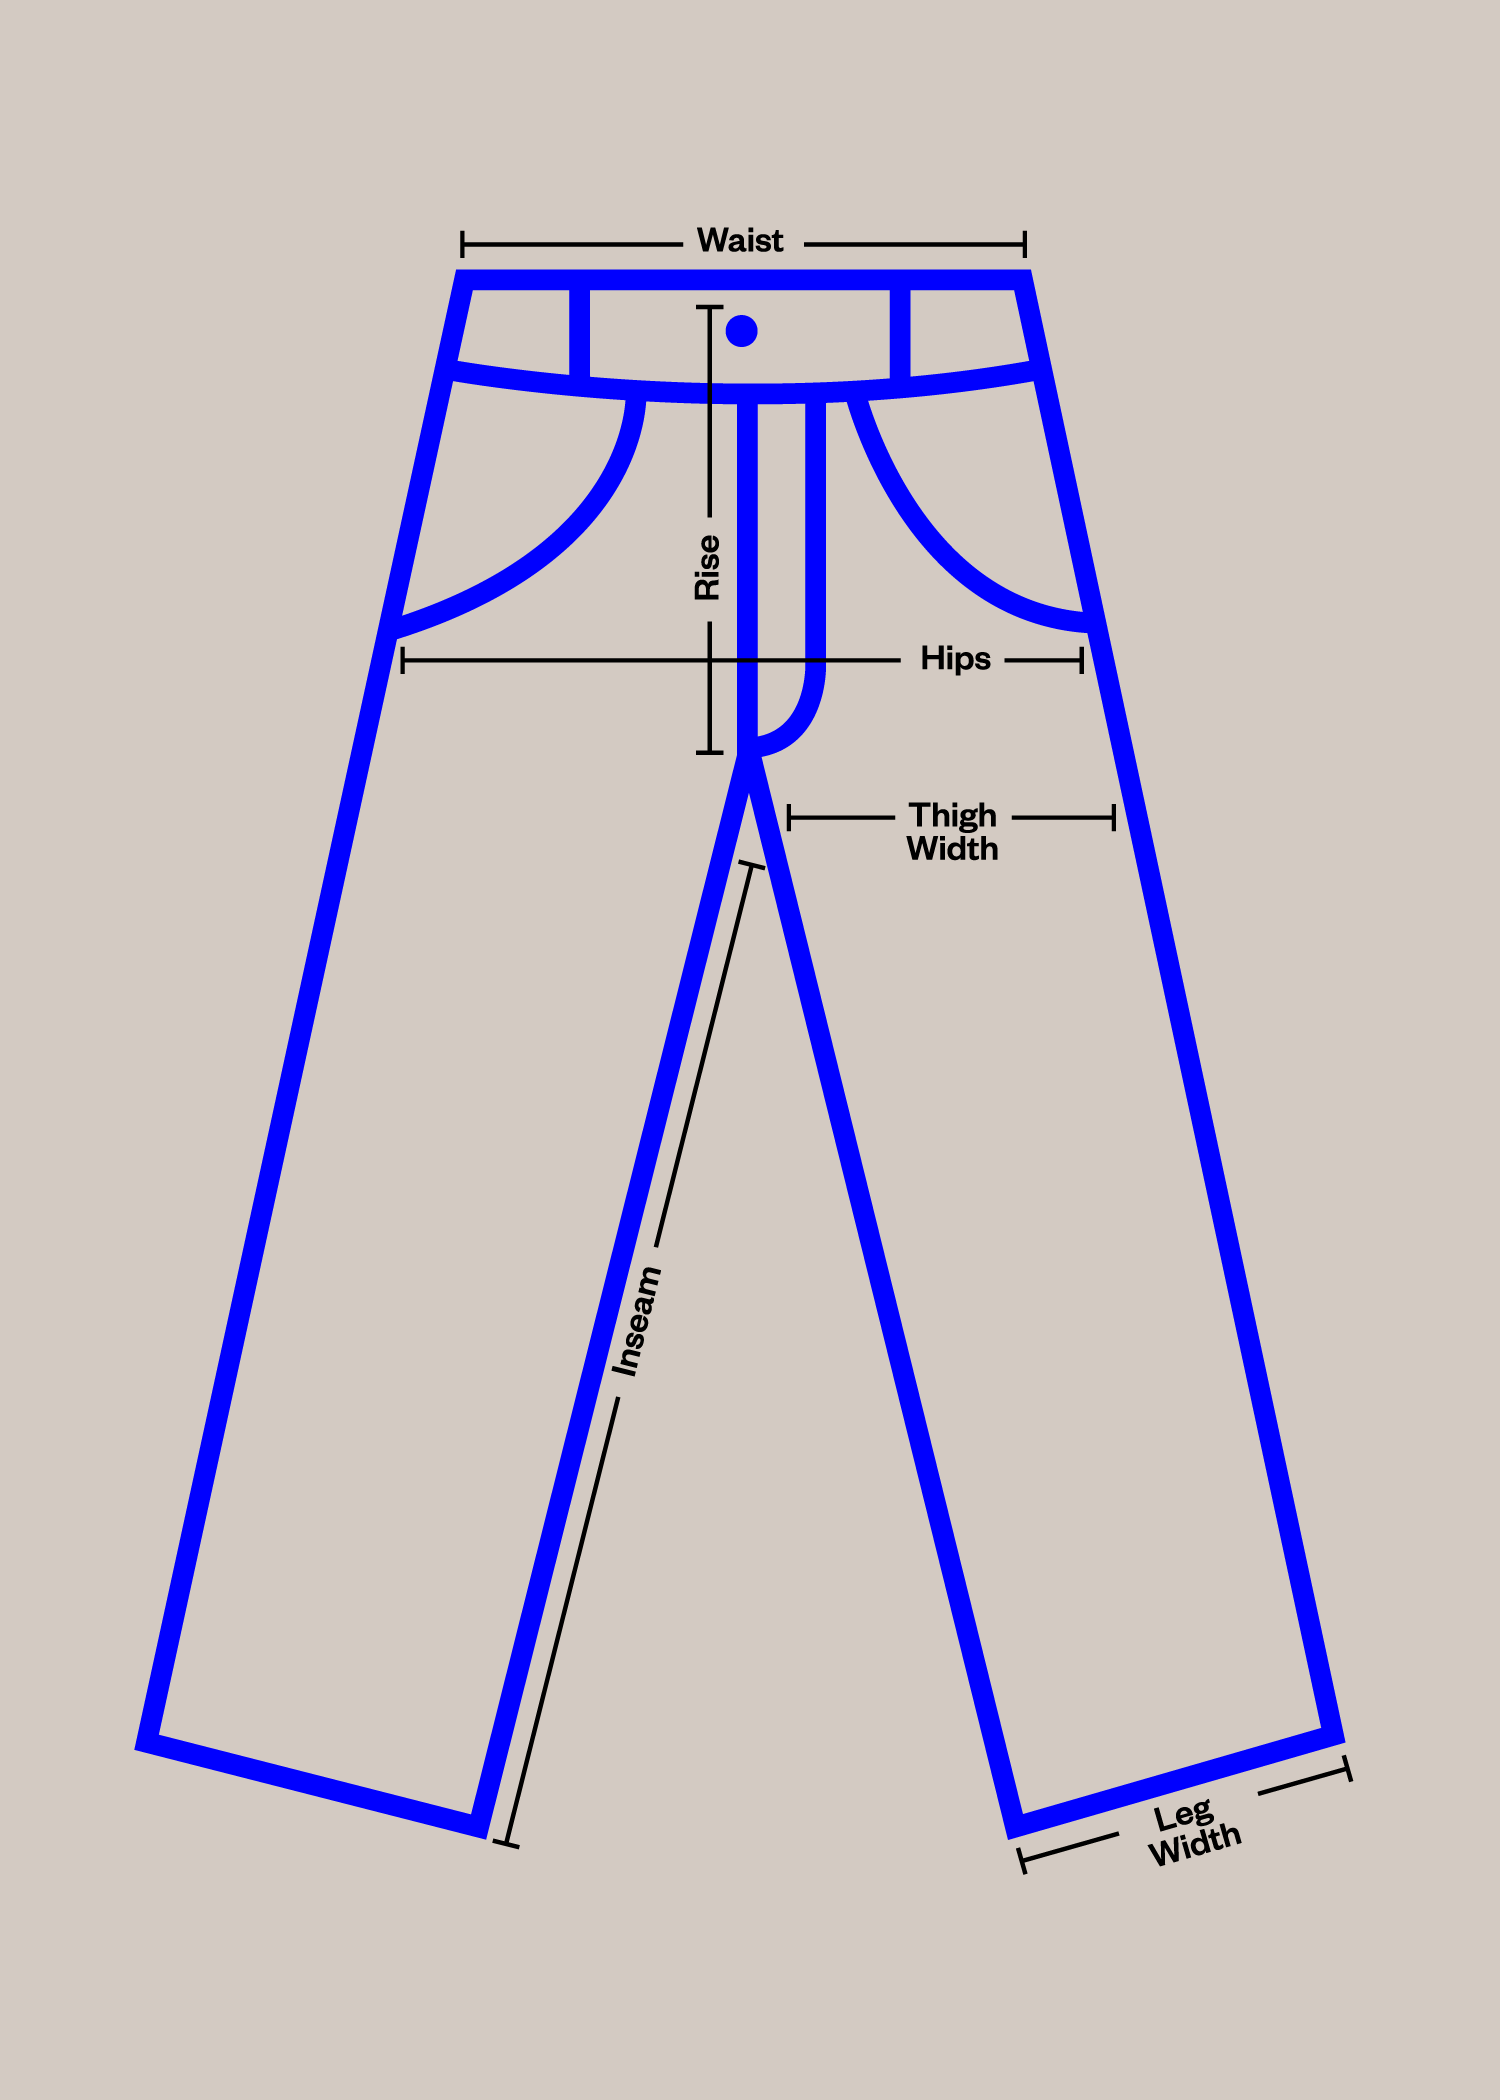 Stan Ray - Jean & Pant Fit Guide 